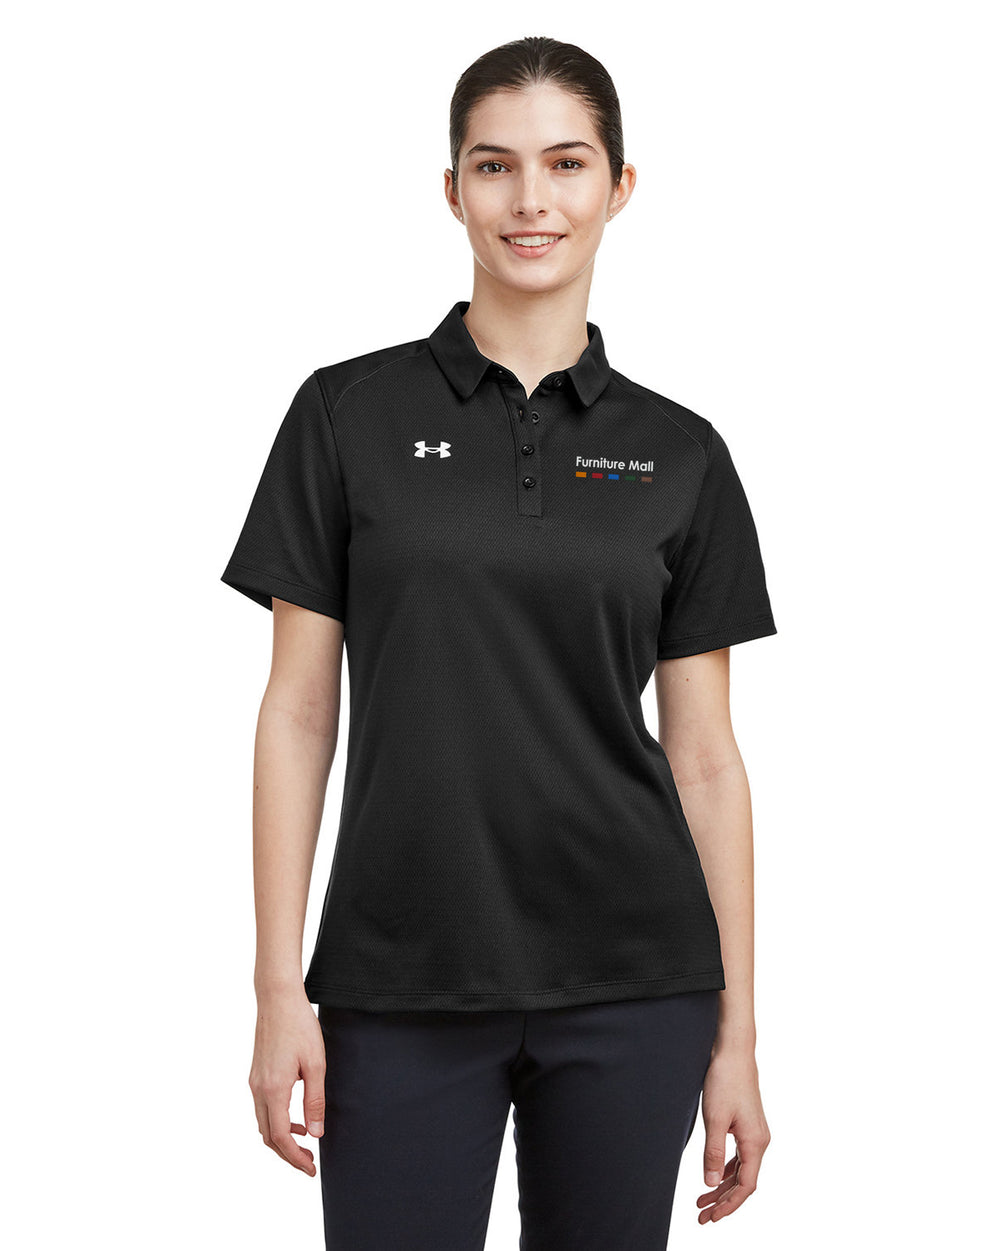 Furniture Mall - Under Armour Ladies' Tech Polo - 1370431